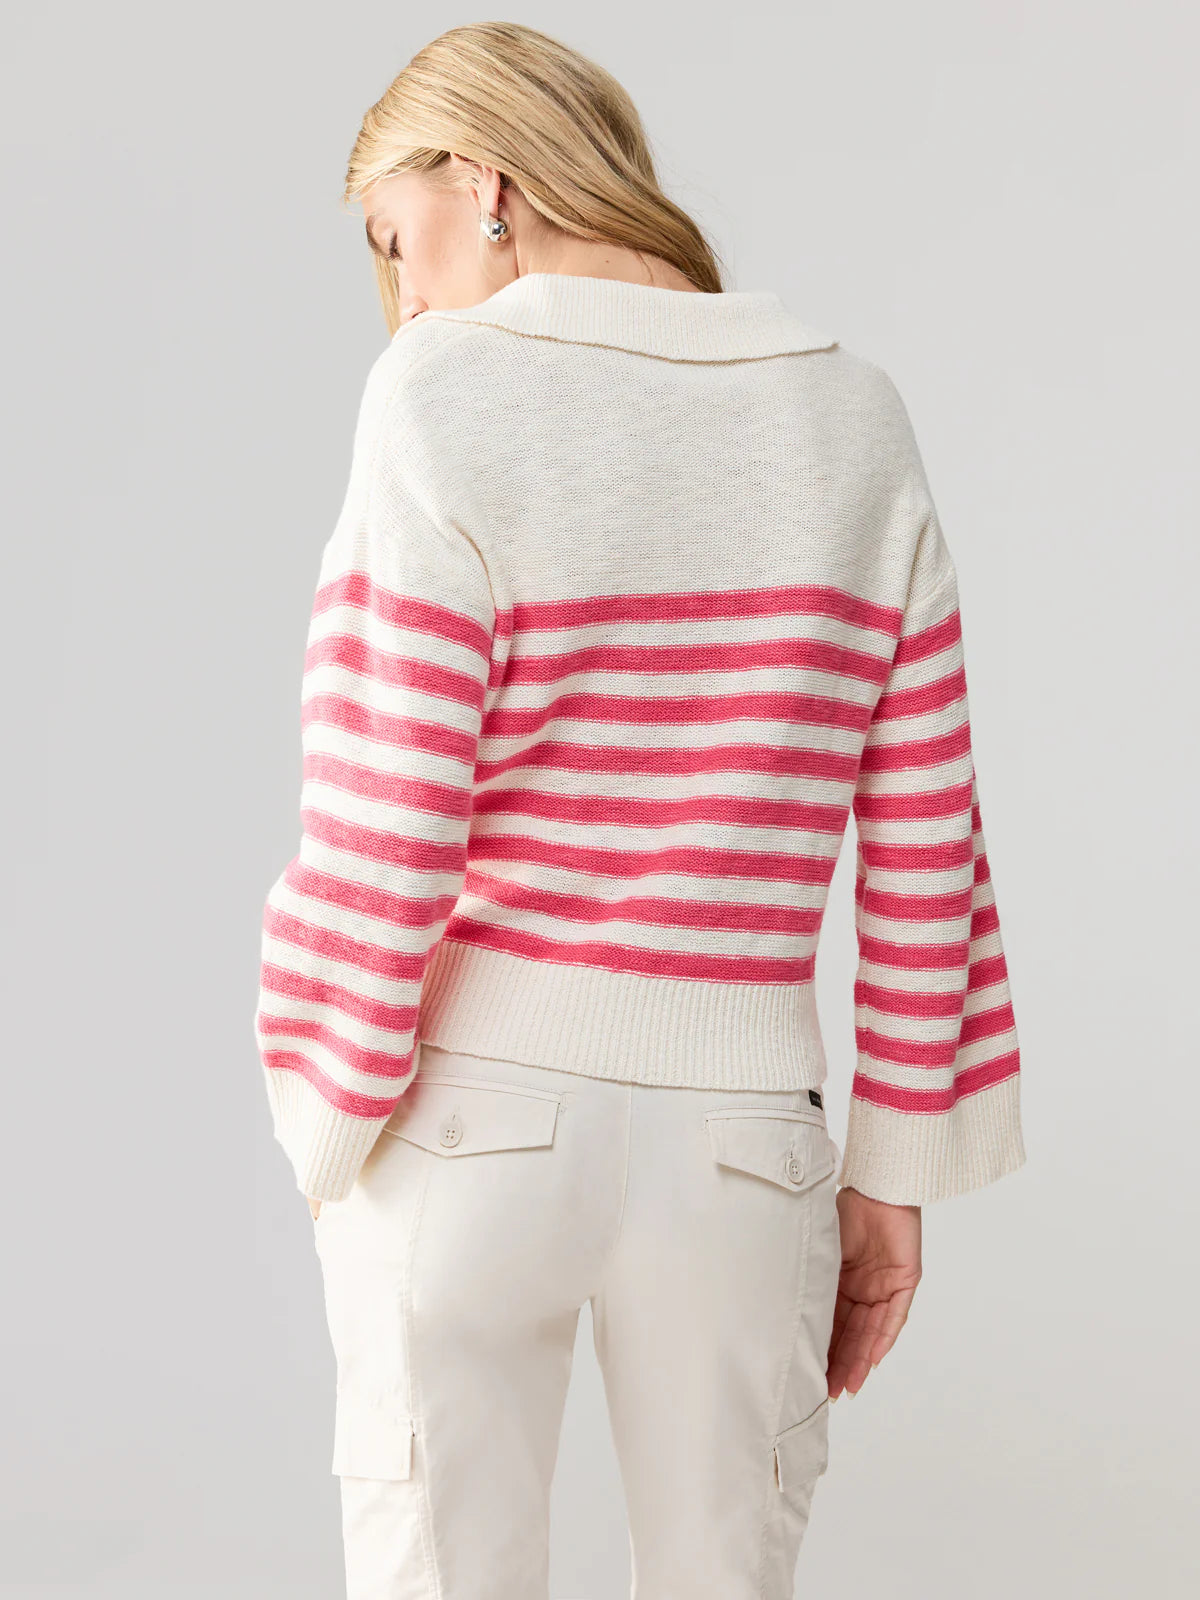 Sanctuary Perfect Timing Sweater- Flushed Stripe